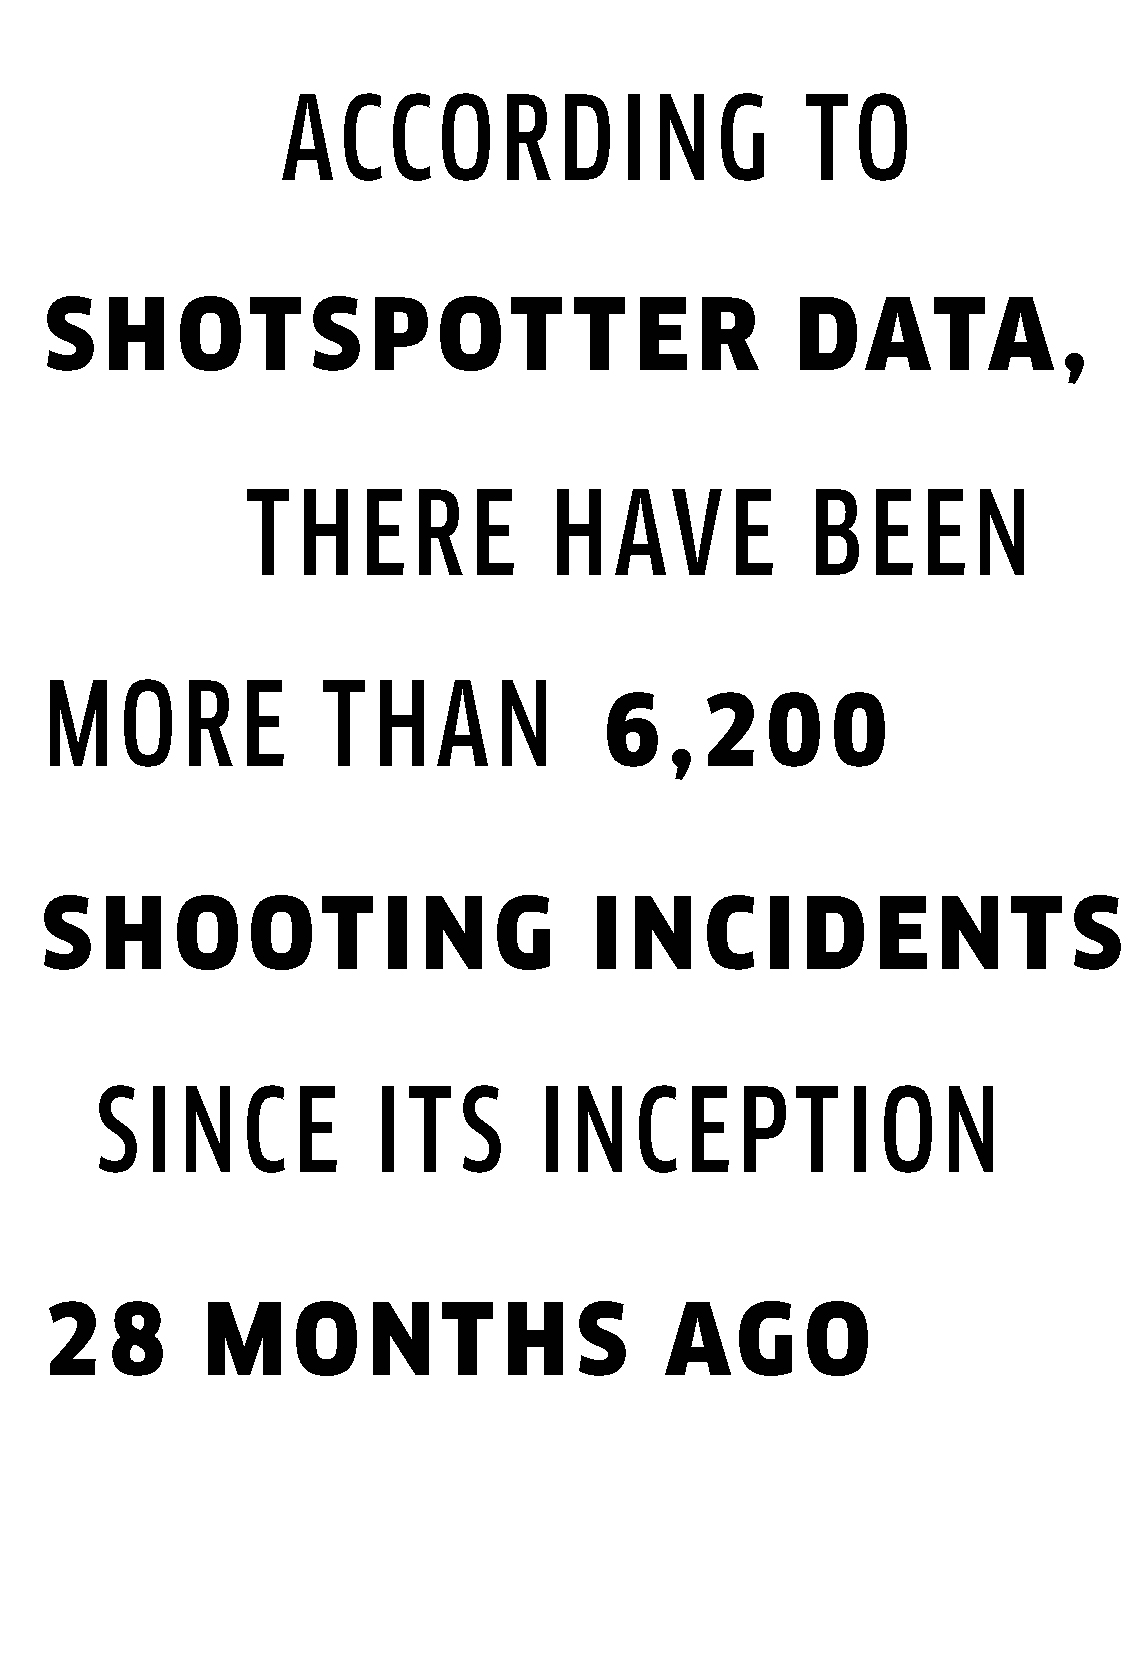 According to Shotspotter data, there have been more than 6,200 shotting incidents since its inception 28 months ago.